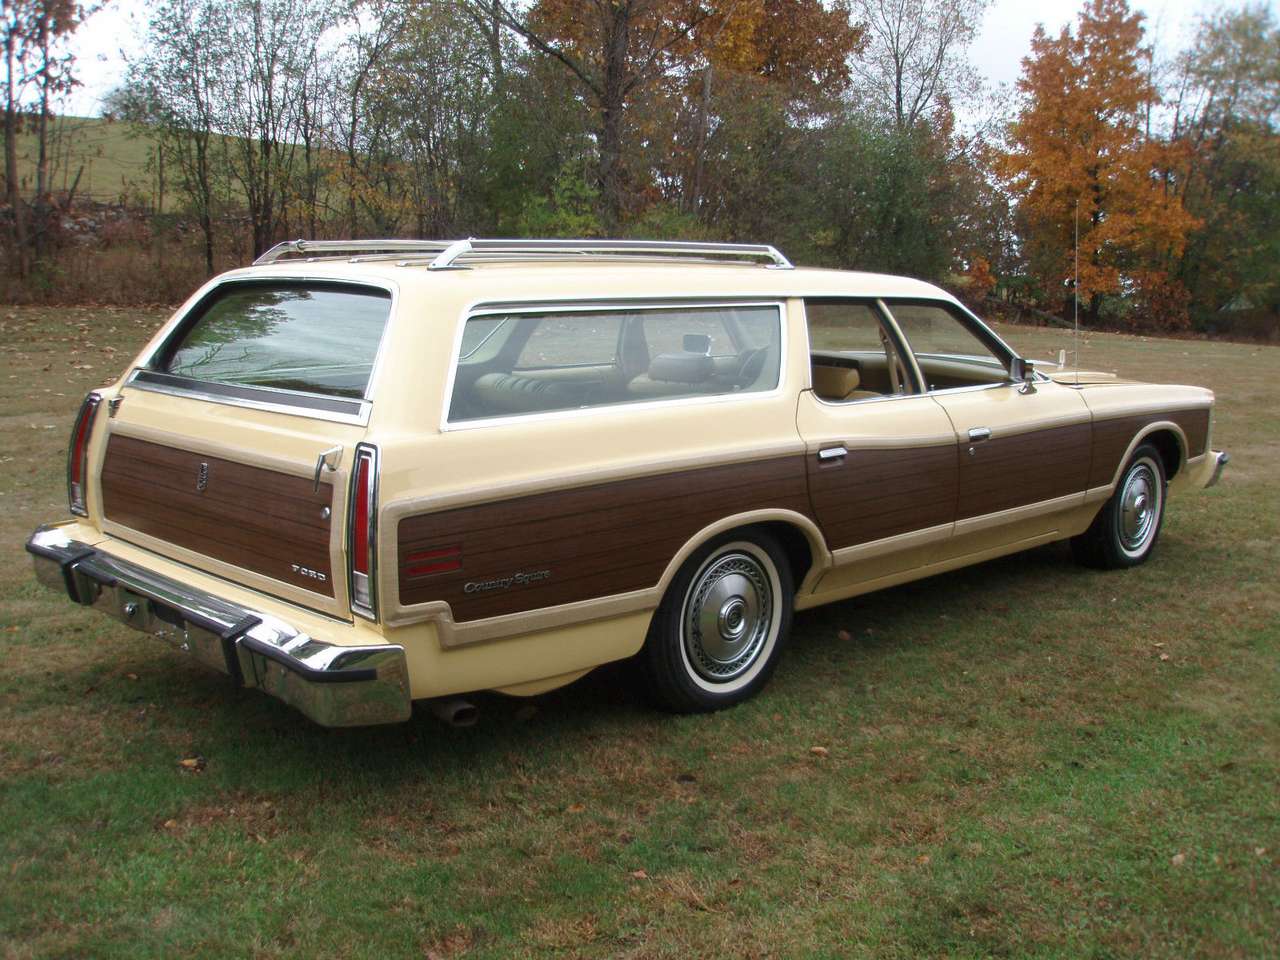 1976 FORD LAND SQUIRE online puzzel